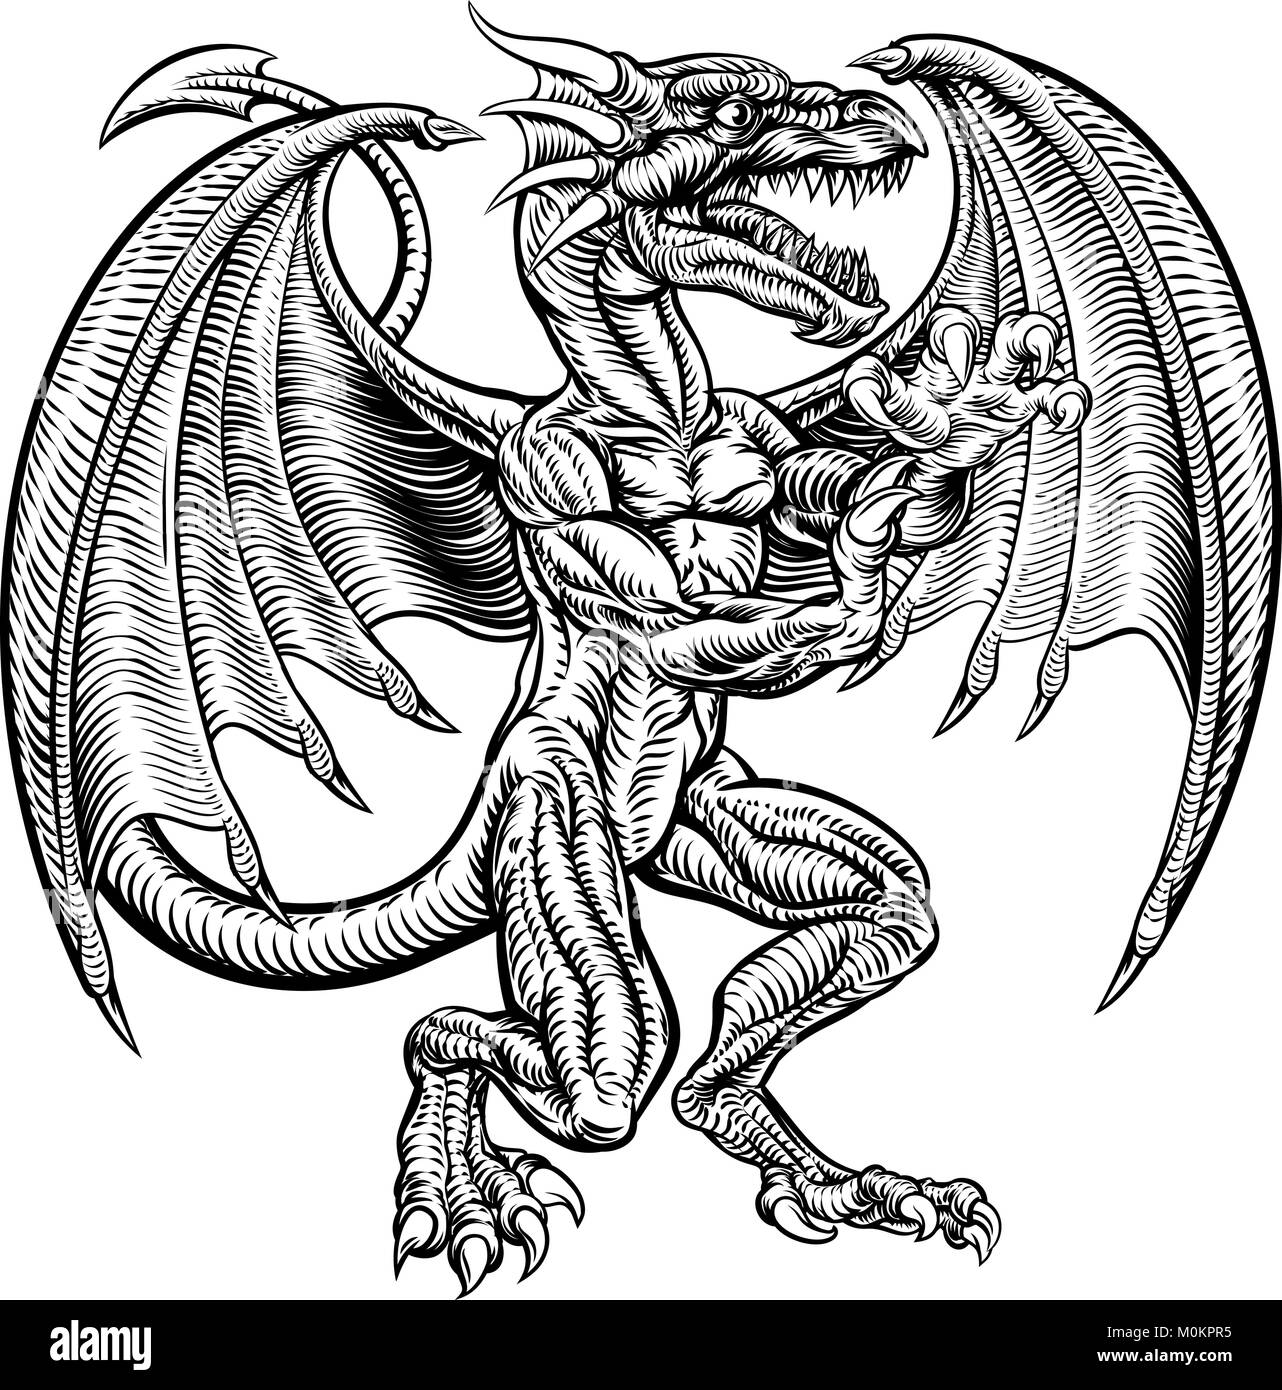 Dragon Drawing in Woodcut Vintage Style Stock Vector